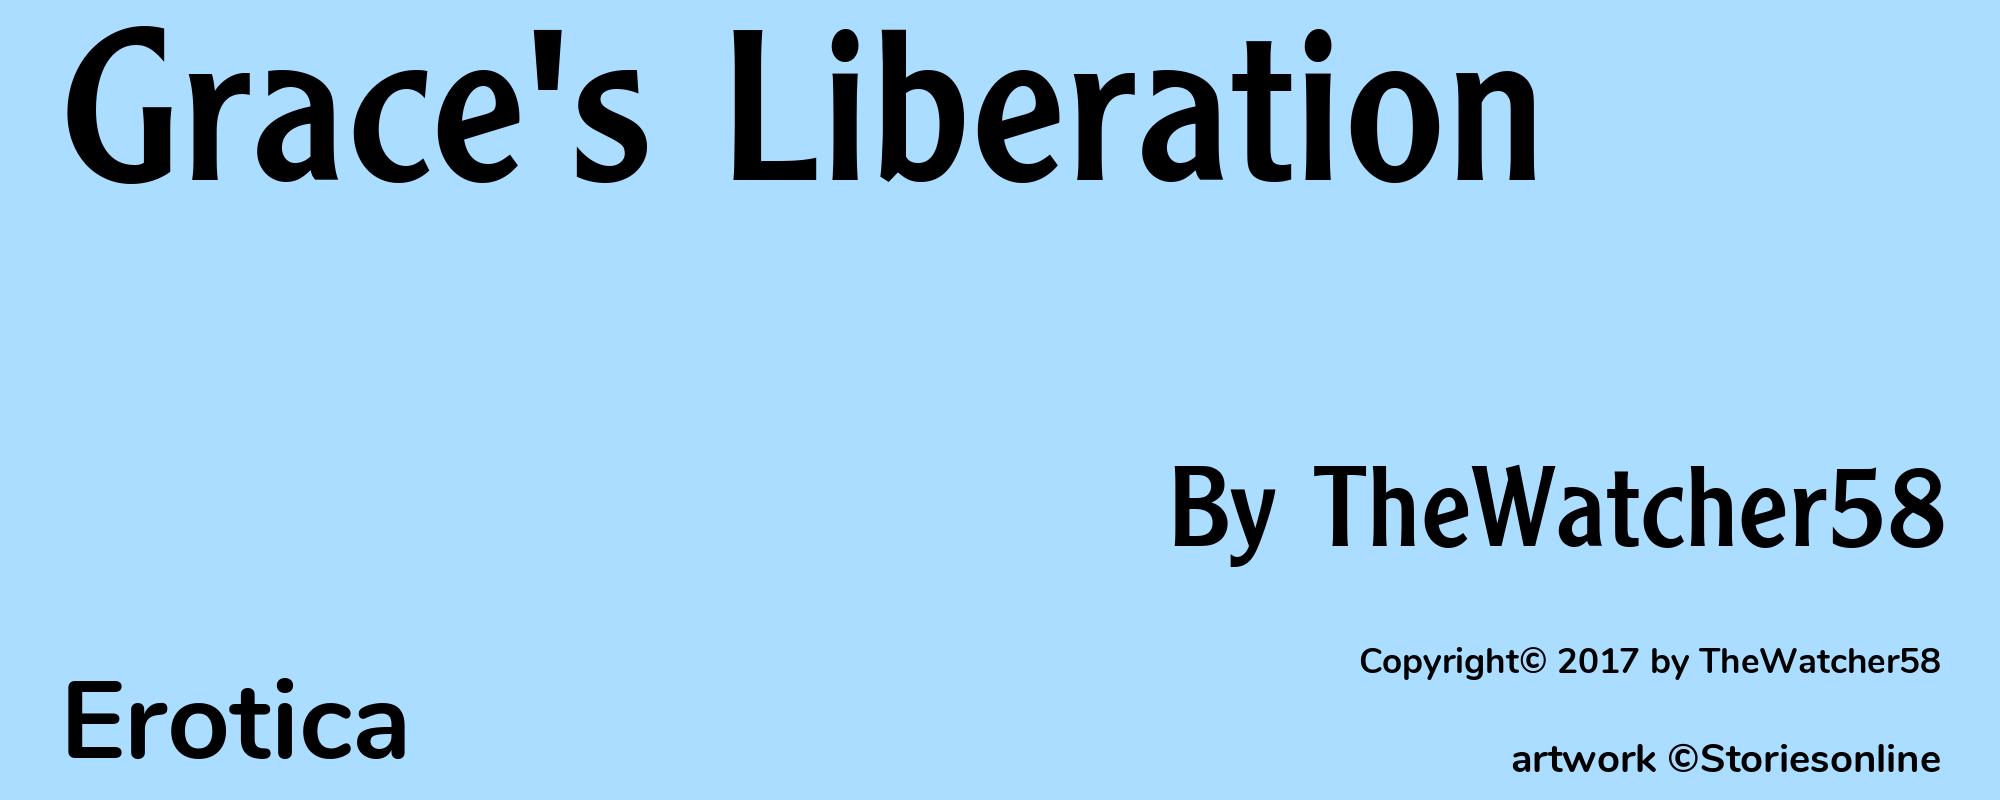 Grace's Liberation - Cover